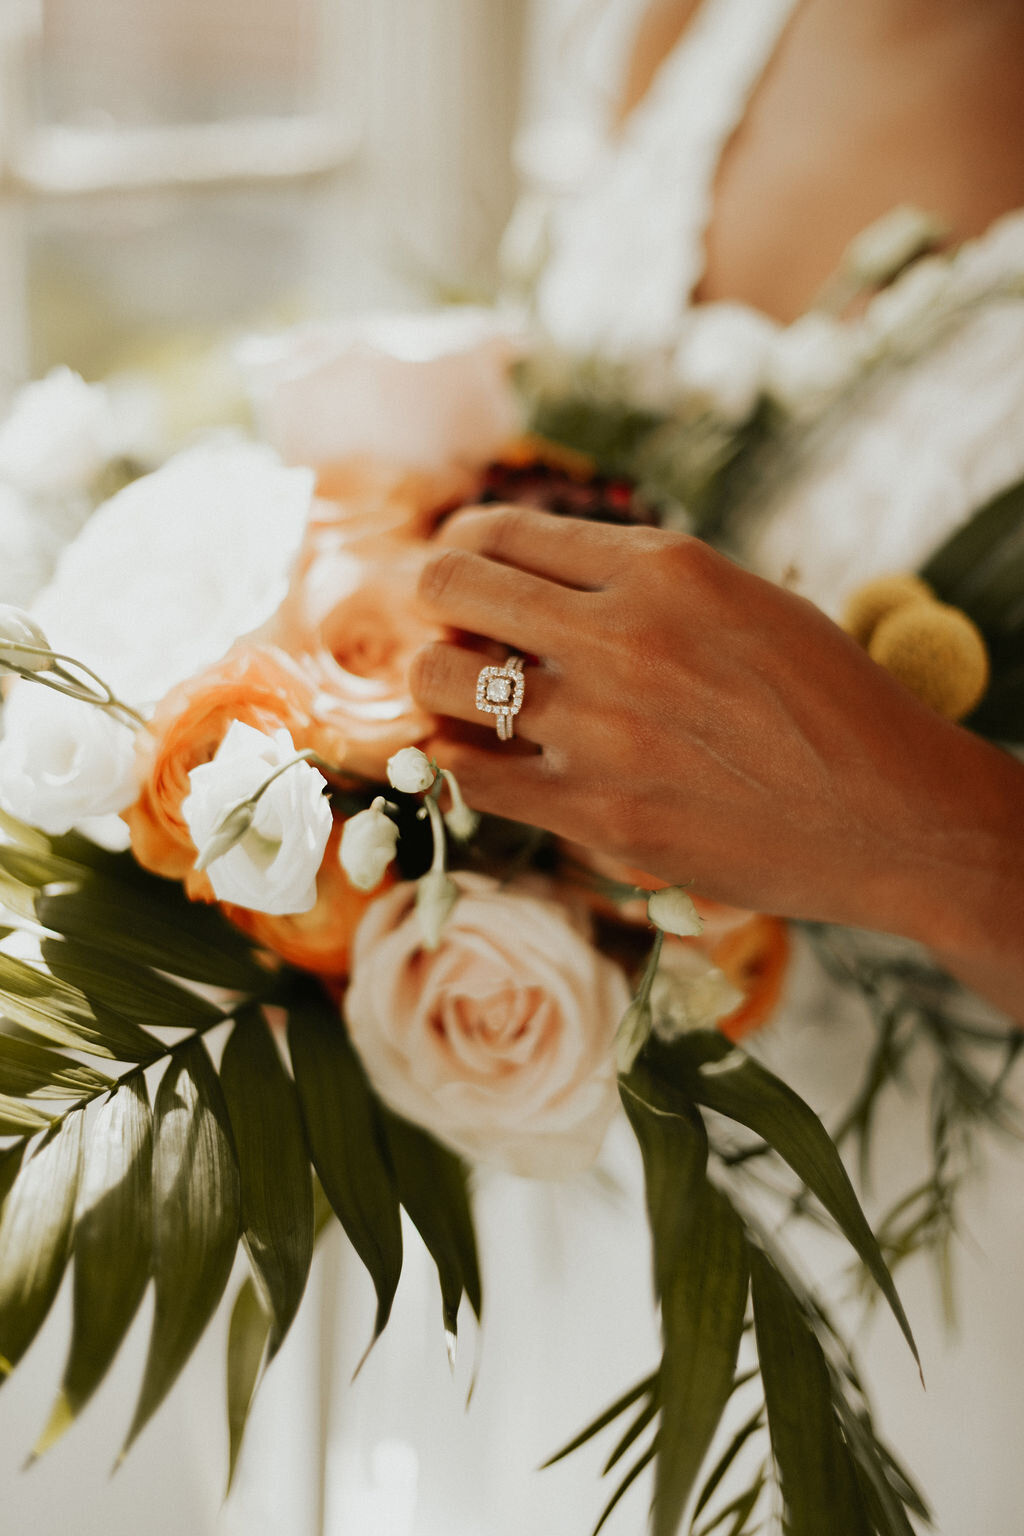 A bride's left hand near her bouquet taken by Courtney Mitchell Photo showcasing her diamond engagement ring and wedding band.